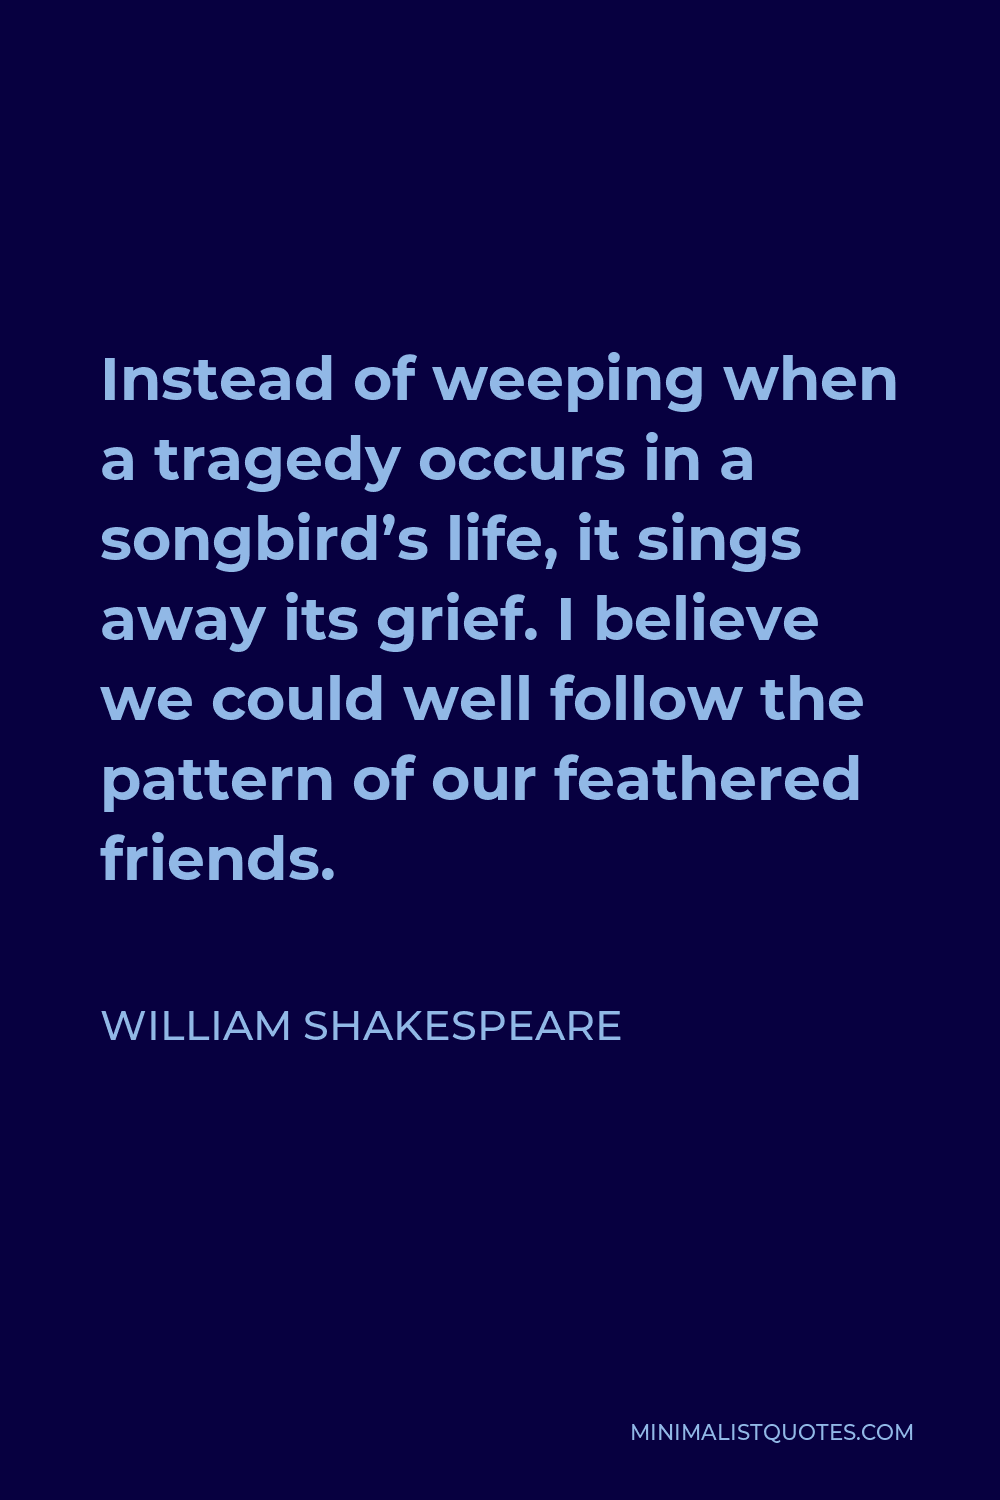 William Shakespeare Quote - Instead of weeping when a tragedy occurs in a songbird’s life, it sings away its grief. I believe we could well follow the pattern of our feathered friends.